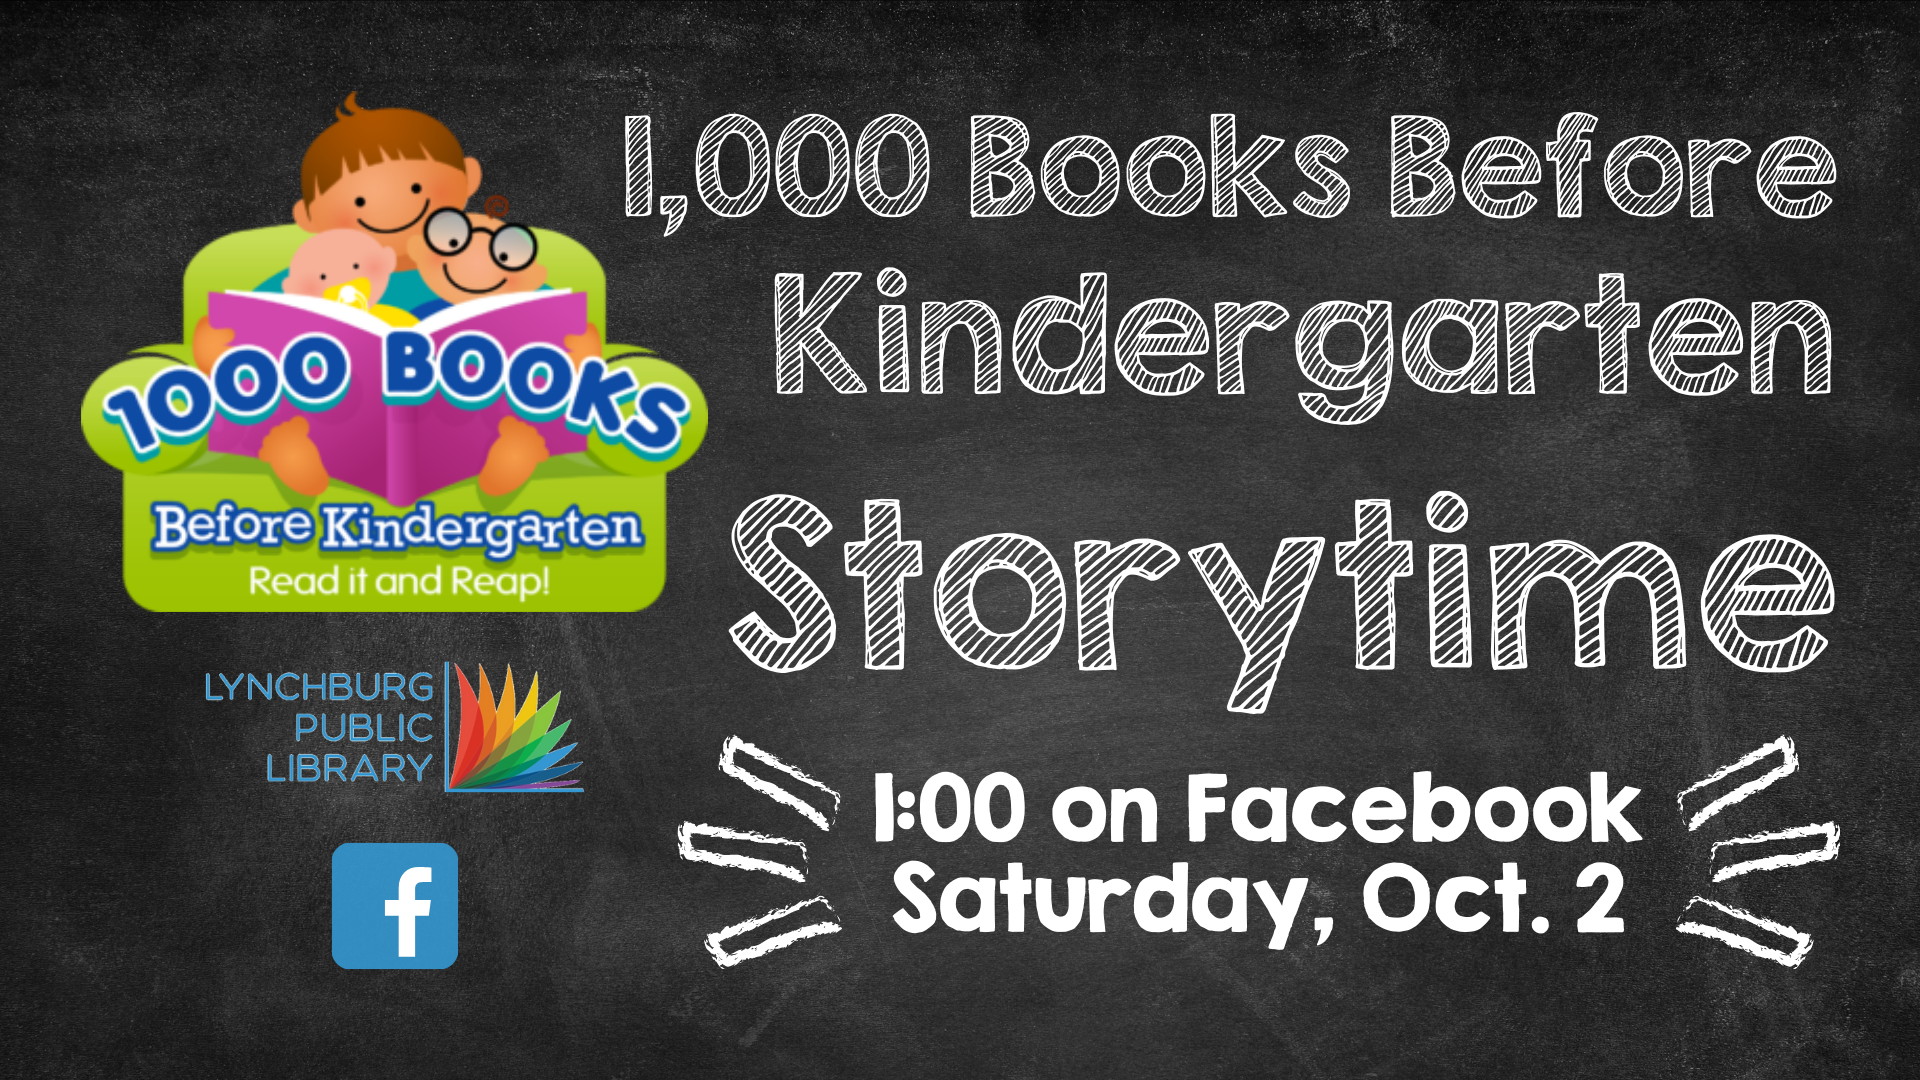 Image features a chalkboard background with the 1,000 Books Before Kindergarten logo and the event title (1,000 Books B4K Storytime) and date/time of Sat. Oct. 2 at 1 PM on Facebook